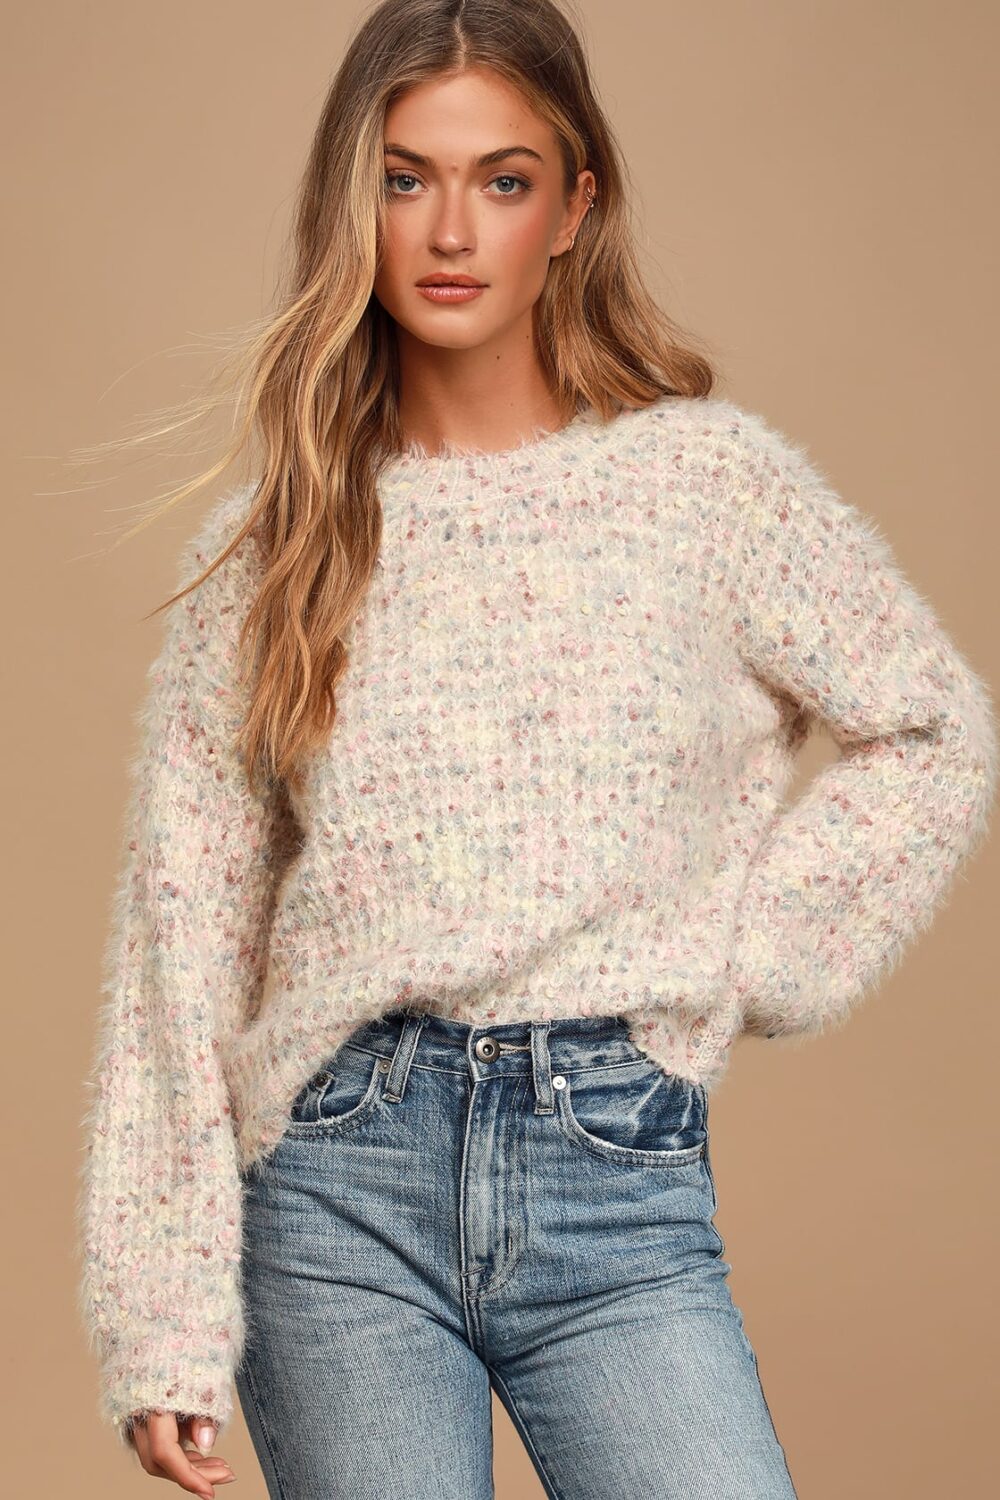 The blush pink soft fuzzy knit sweater is ready to welcome the season of cuddles The confetti like strands of pink blue and cream in this sweater are adorable.